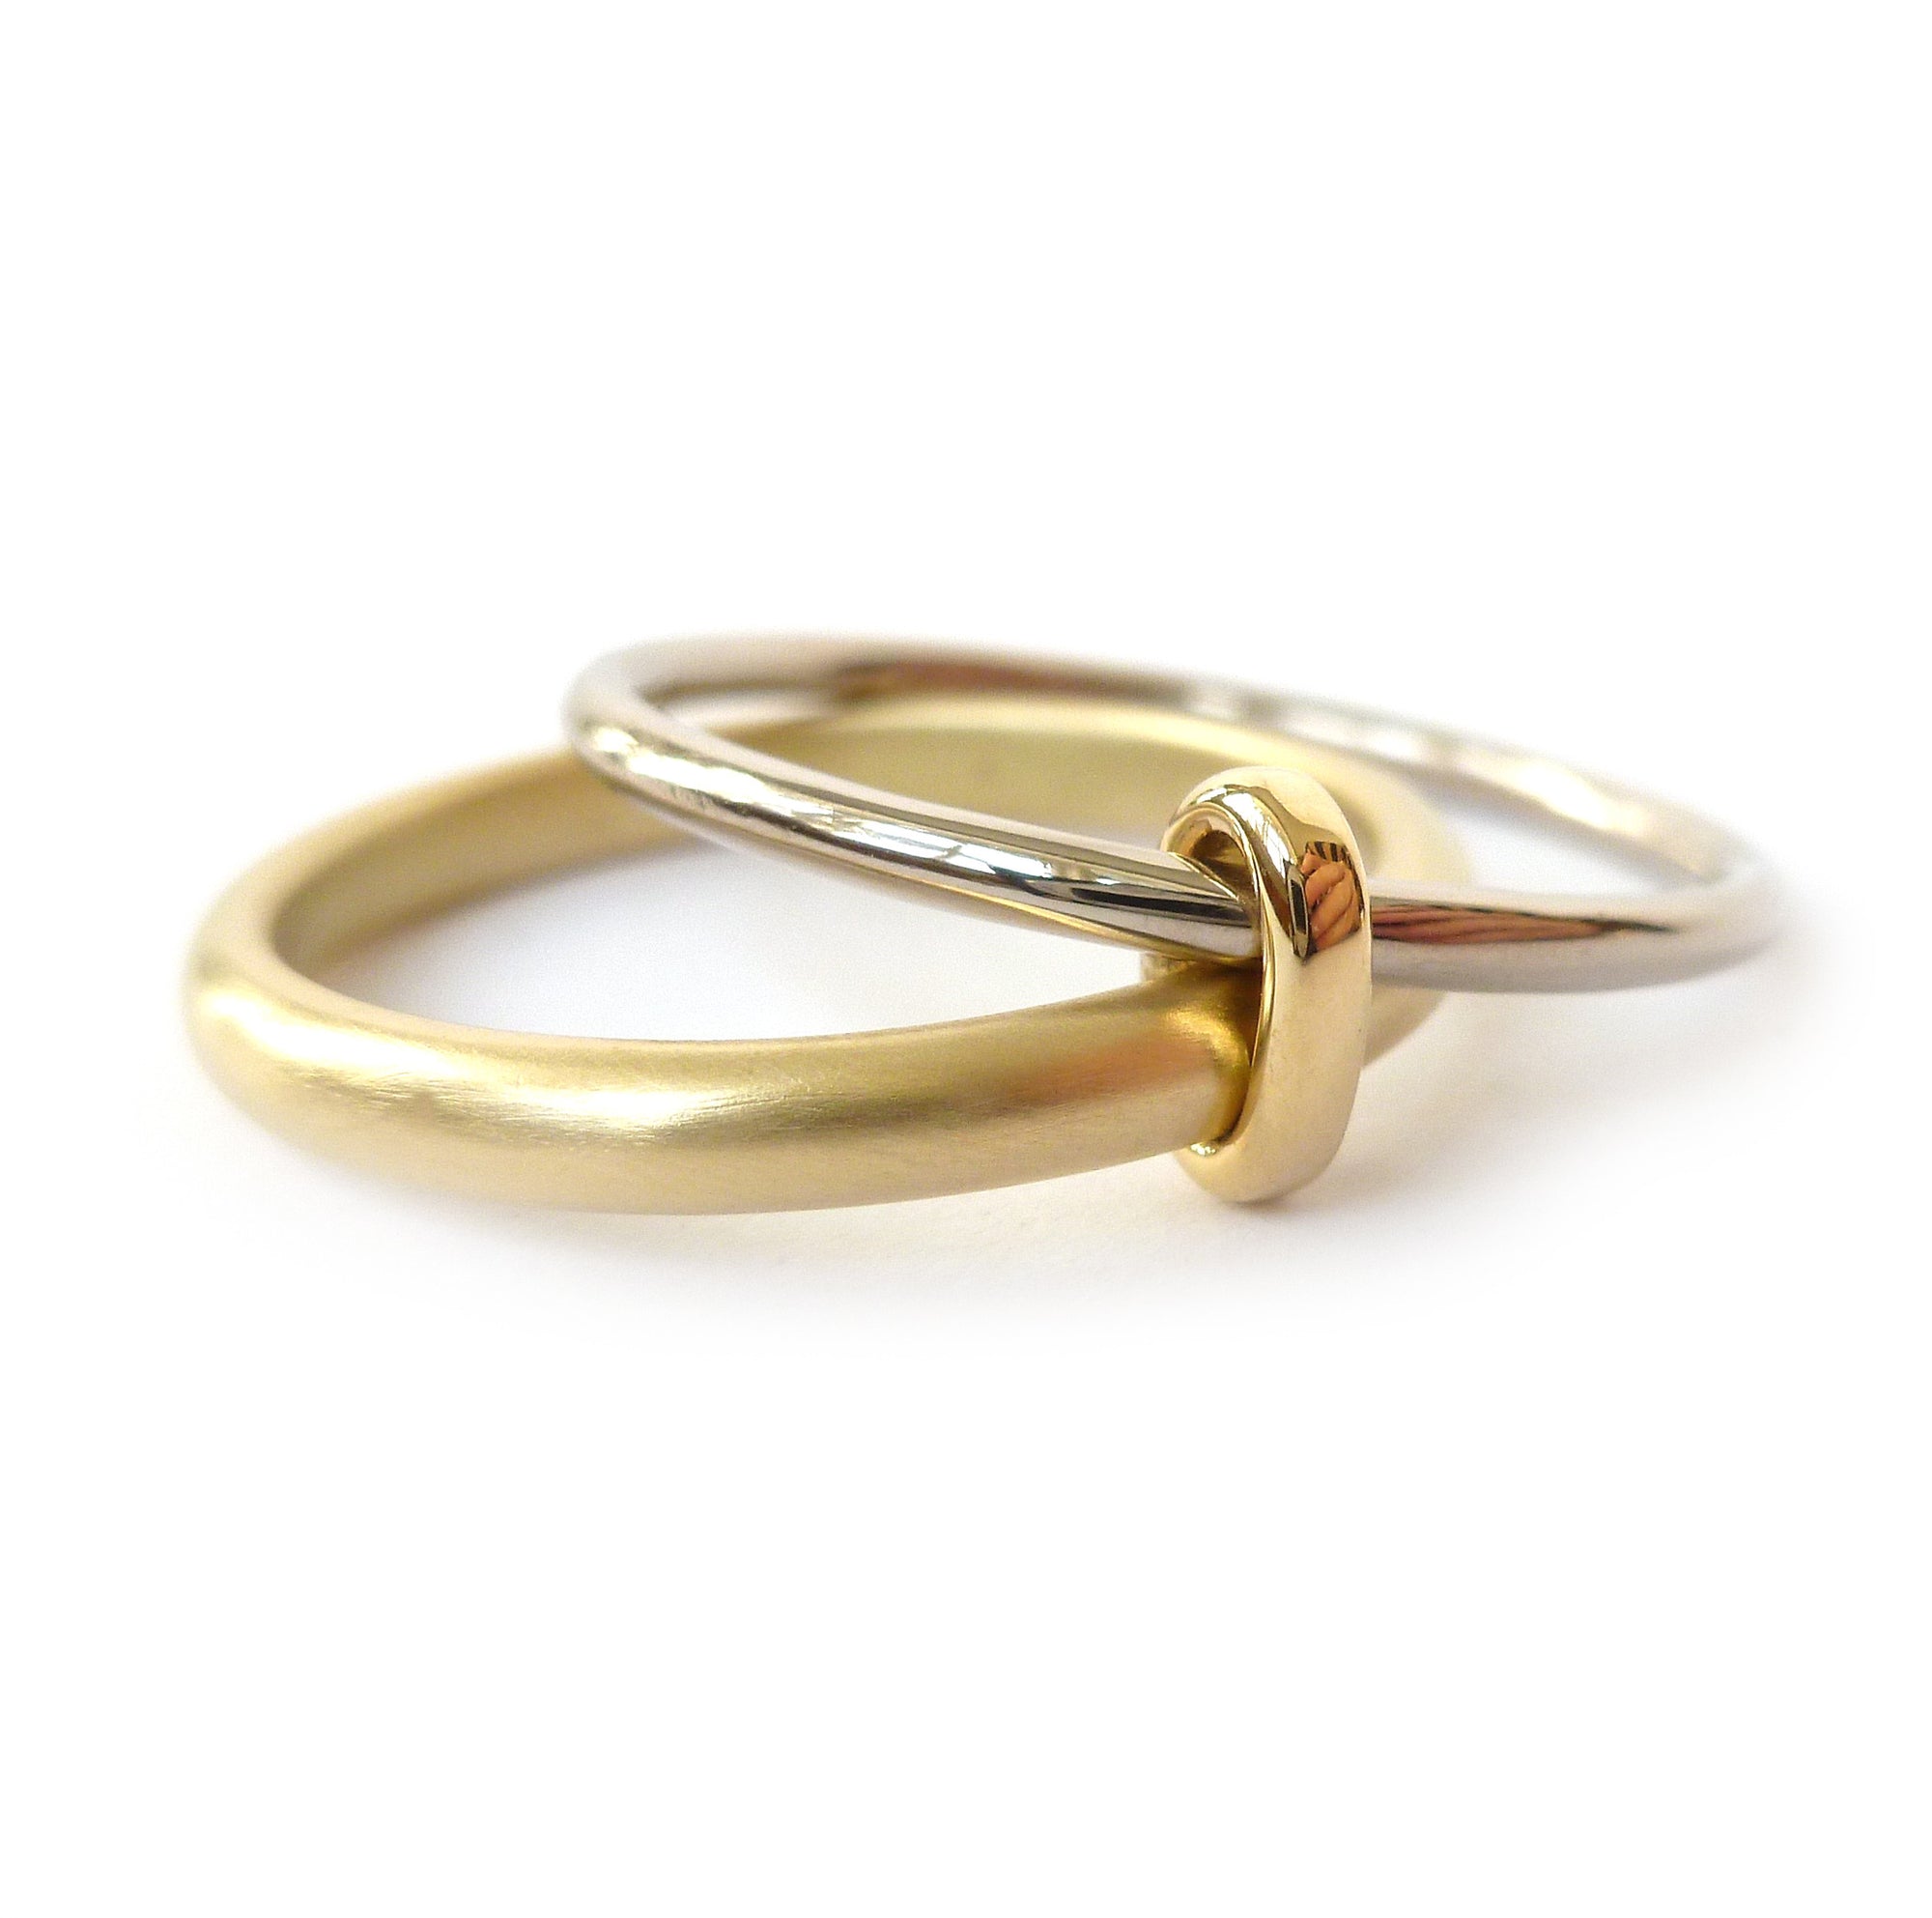 18k gold two band ring (rd18) - Sue Lane Contemporary Jewellery - 2